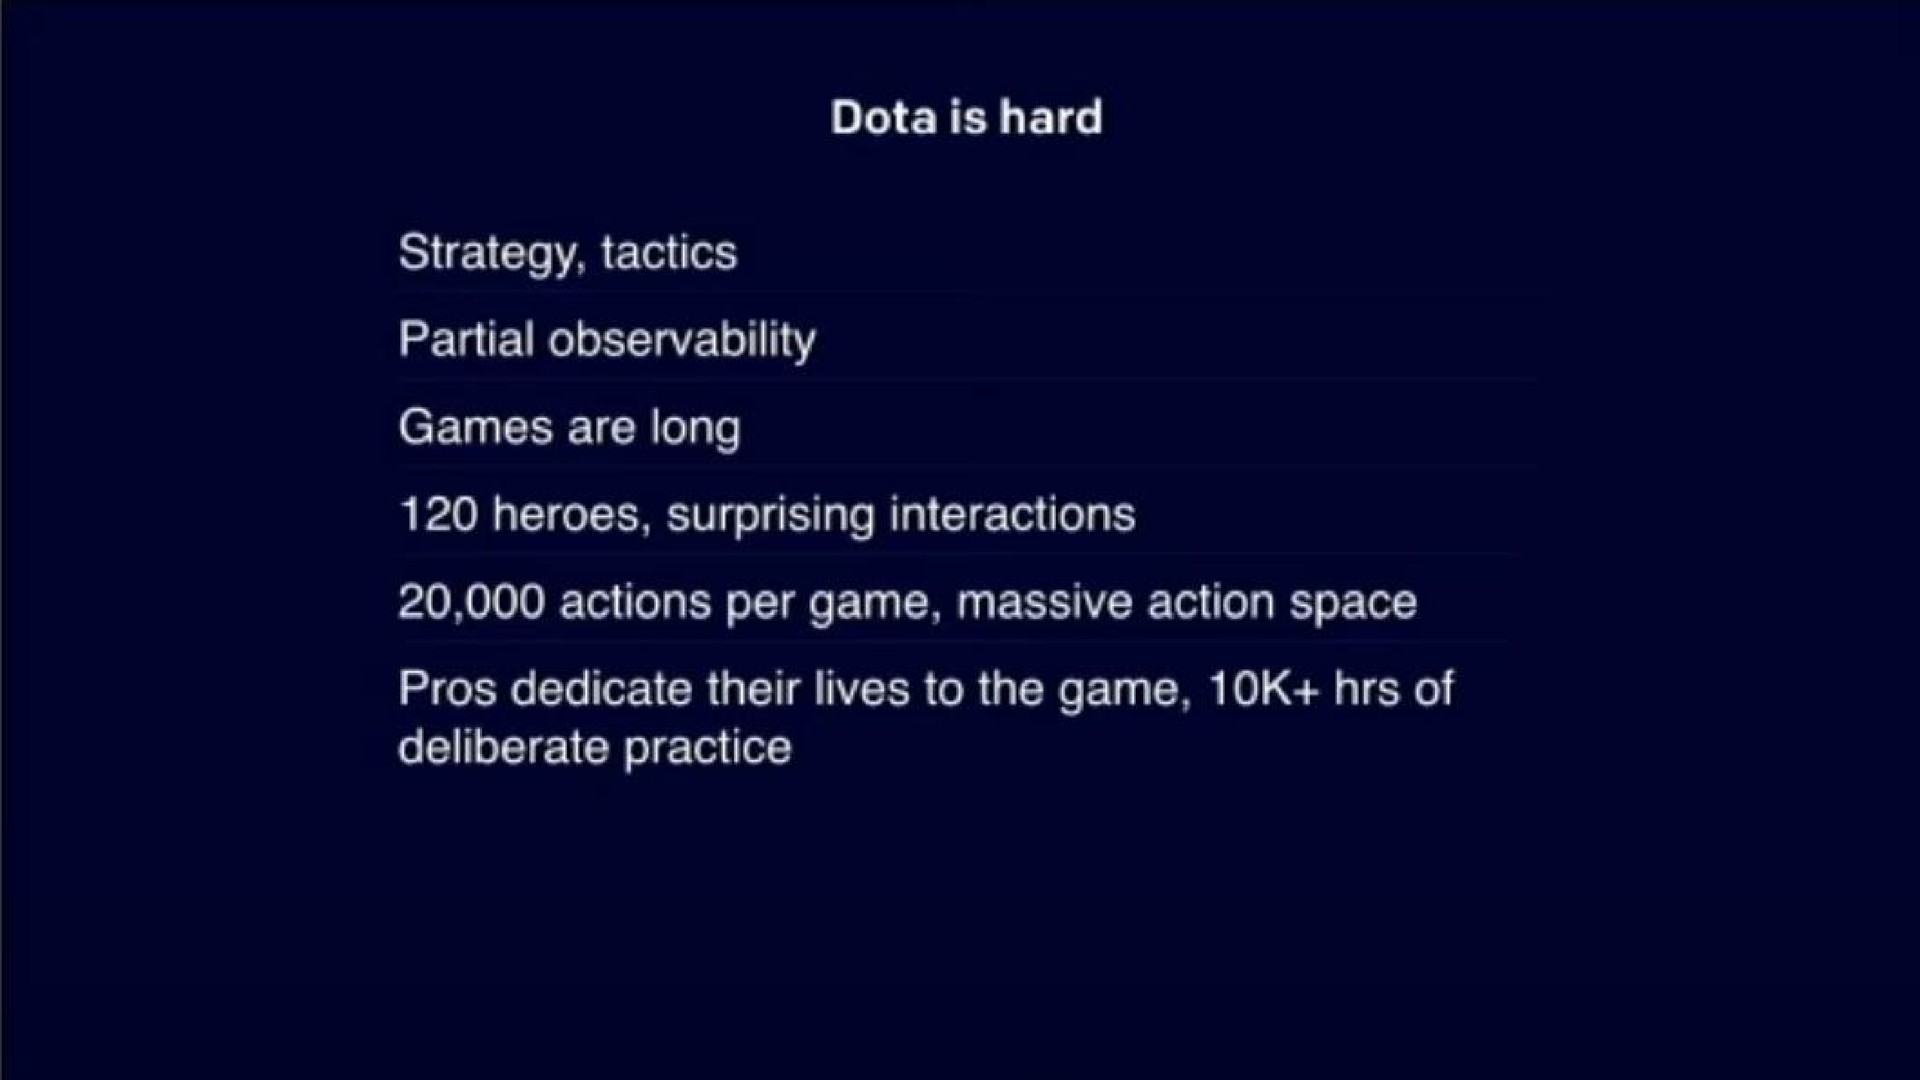 strategy tactics partial observability games are long heroes surprising interactions actions per game massive action space pros dedicate their lives to the game of deliberate practice | OpenAI